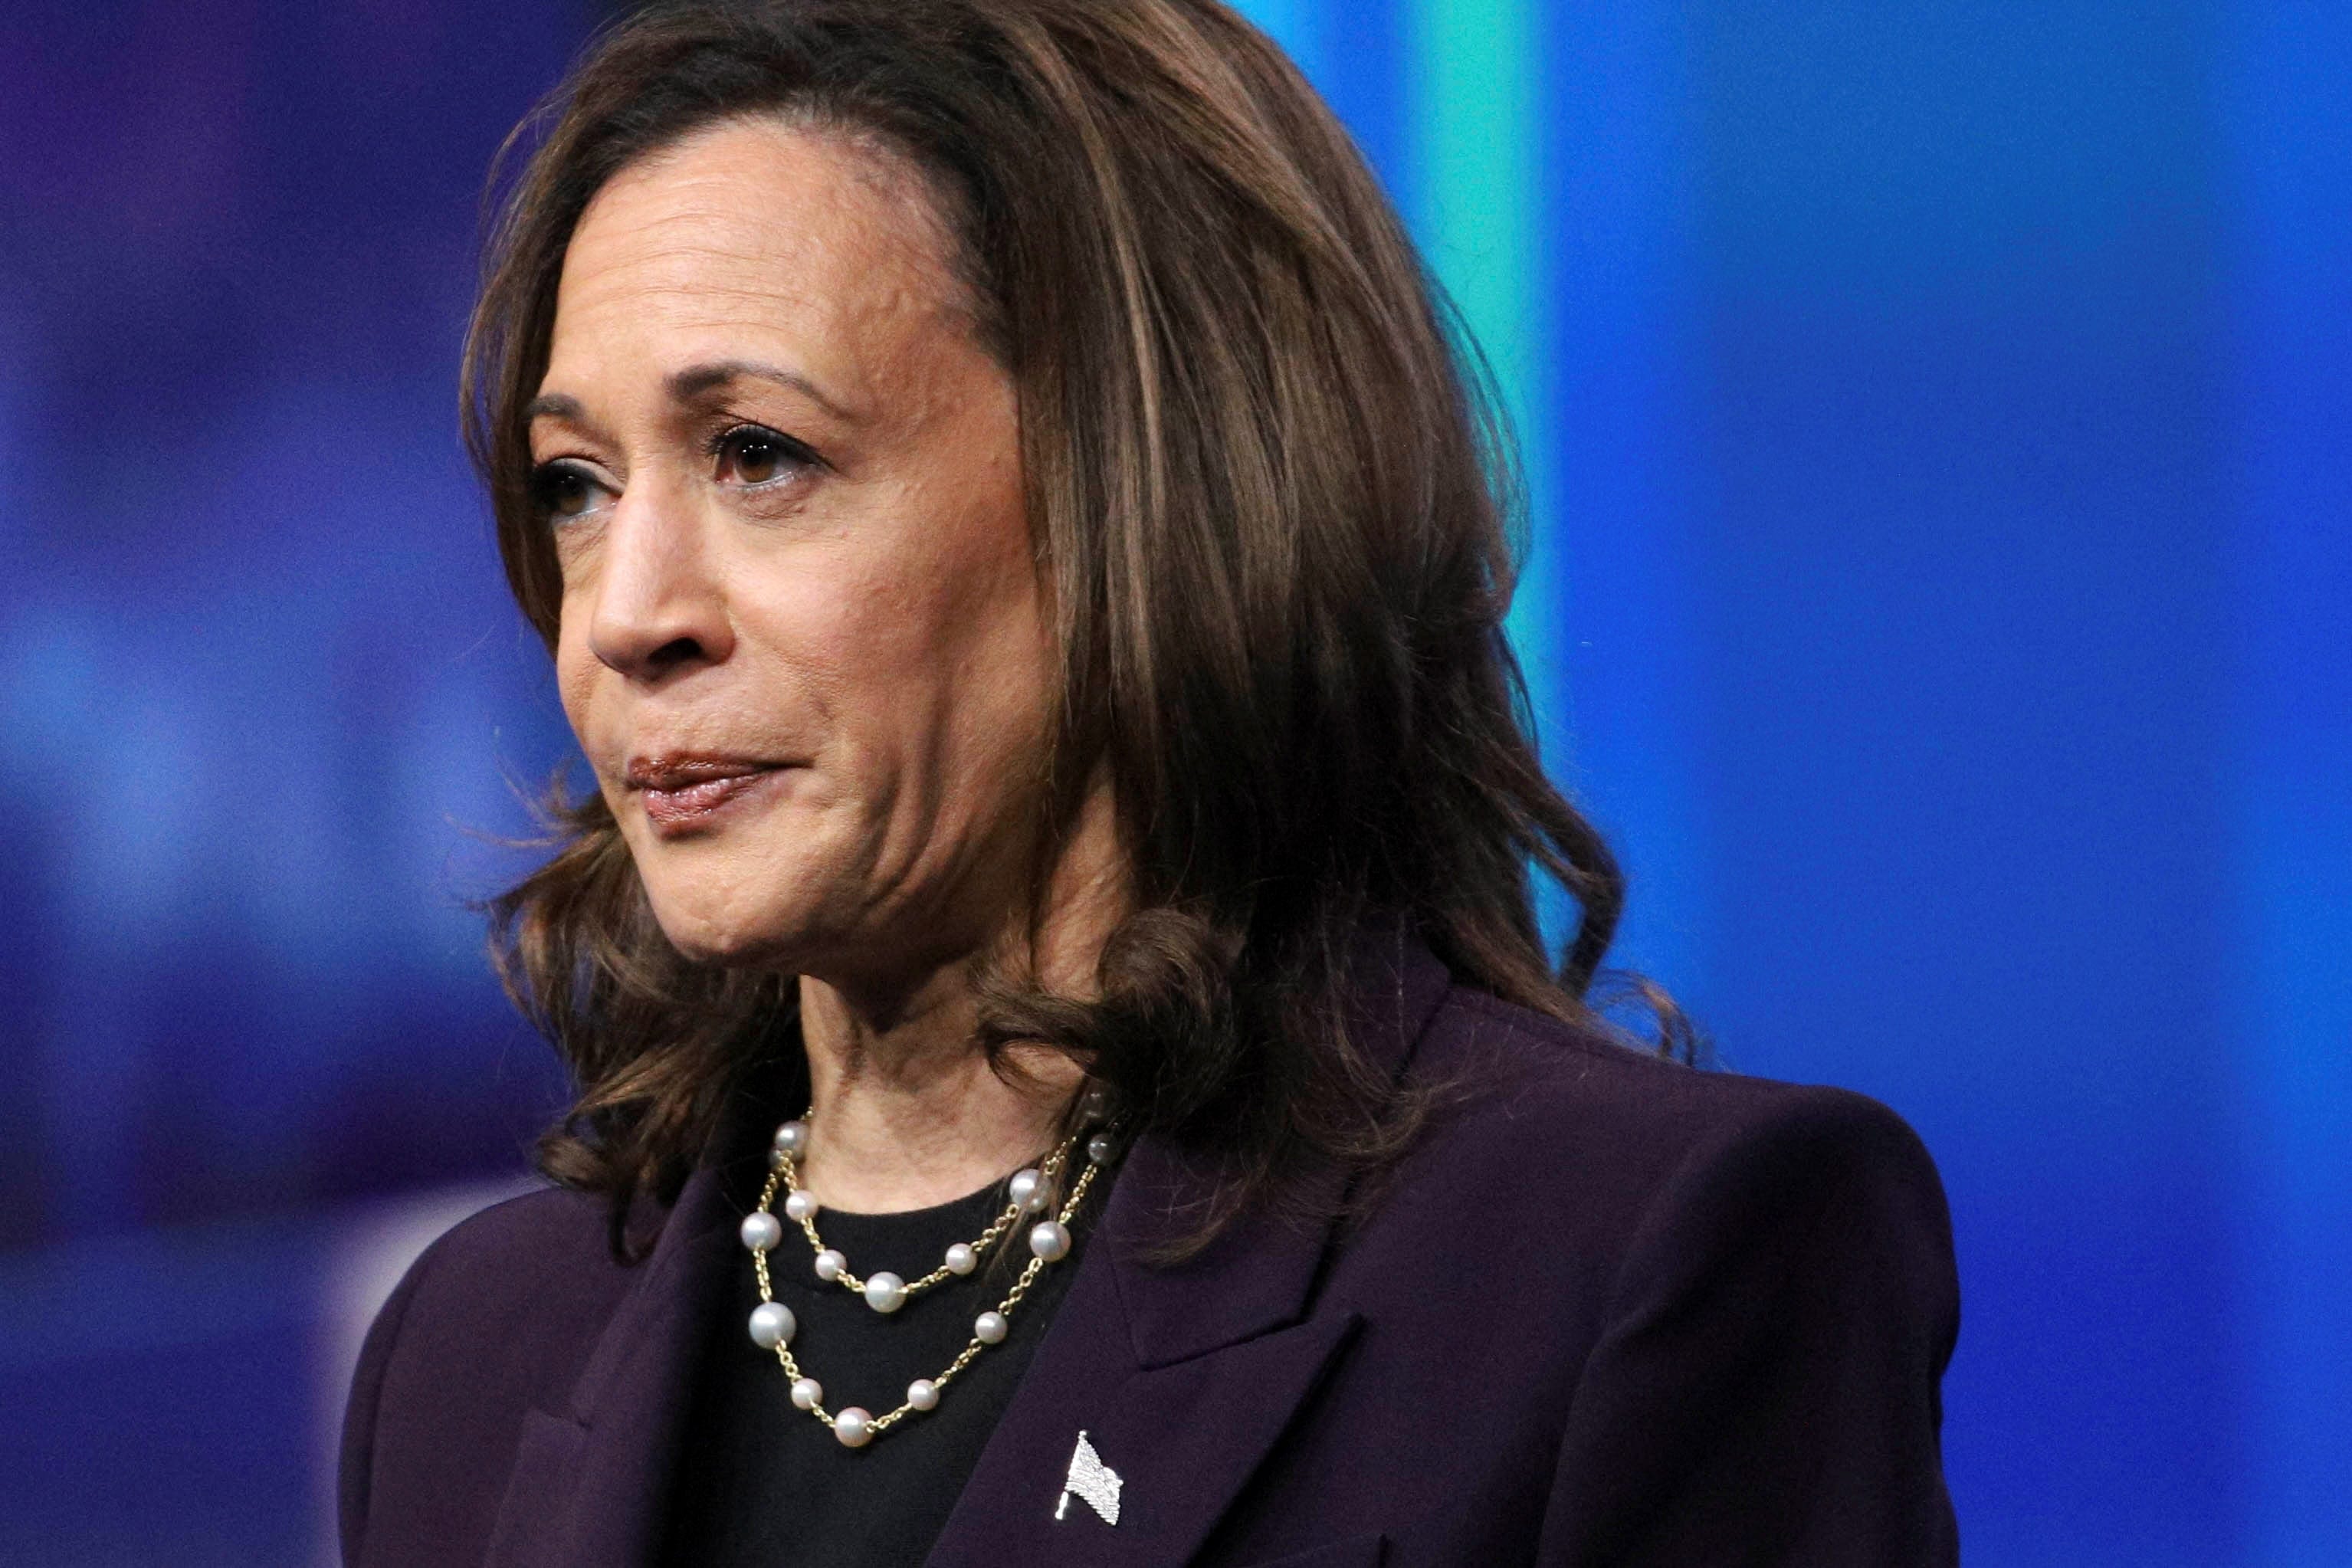 Kamala Harris is facing attacks on her racial identity. Here’s more about her background.